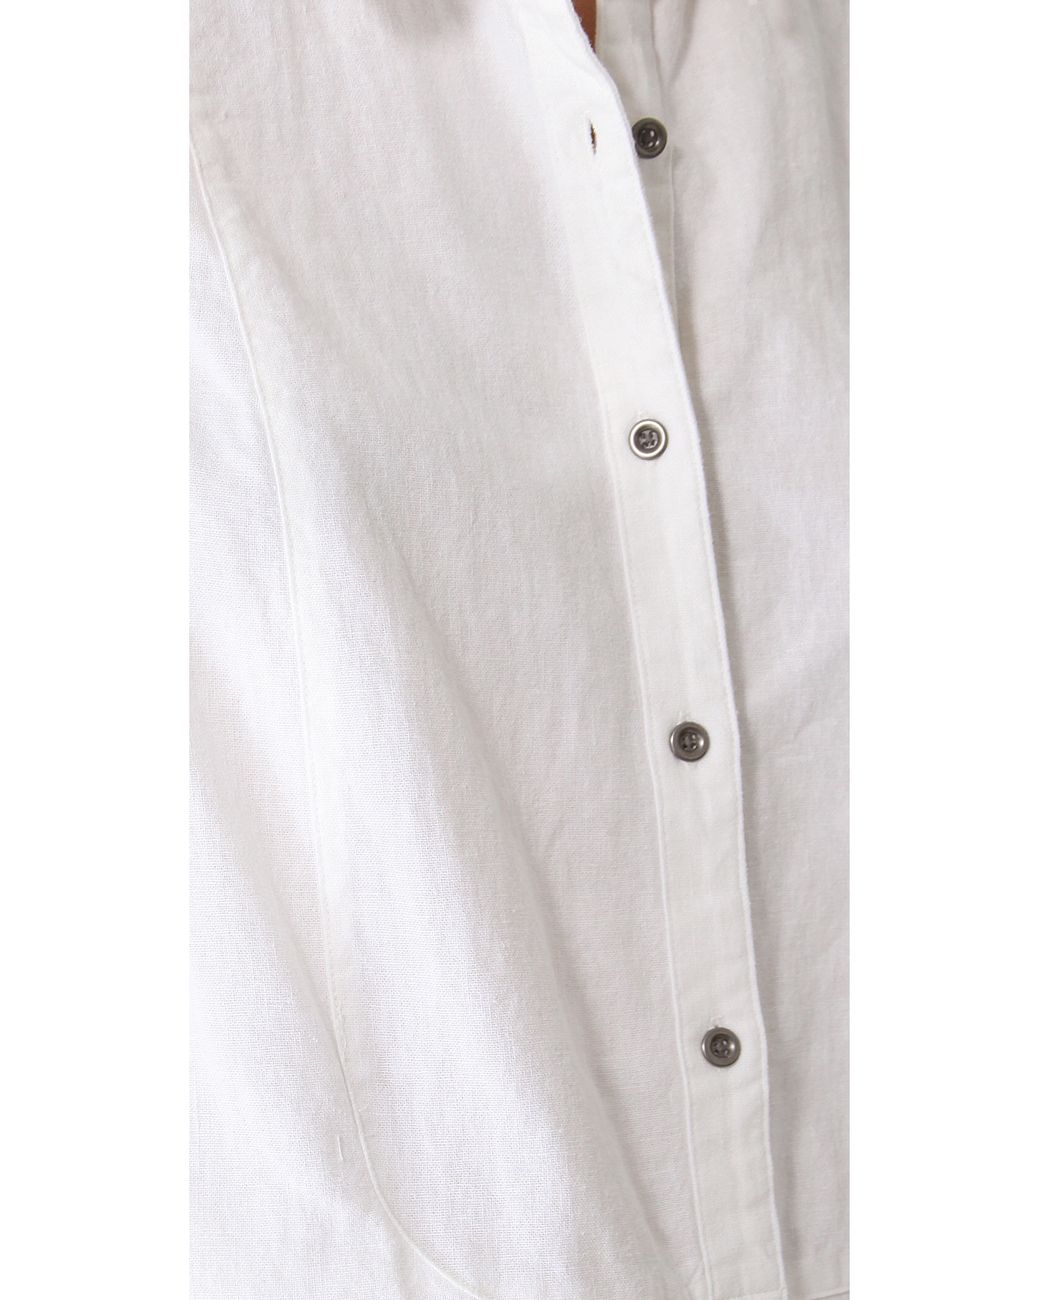 Free People Linen Sleeveless Shirt in White | Lyst